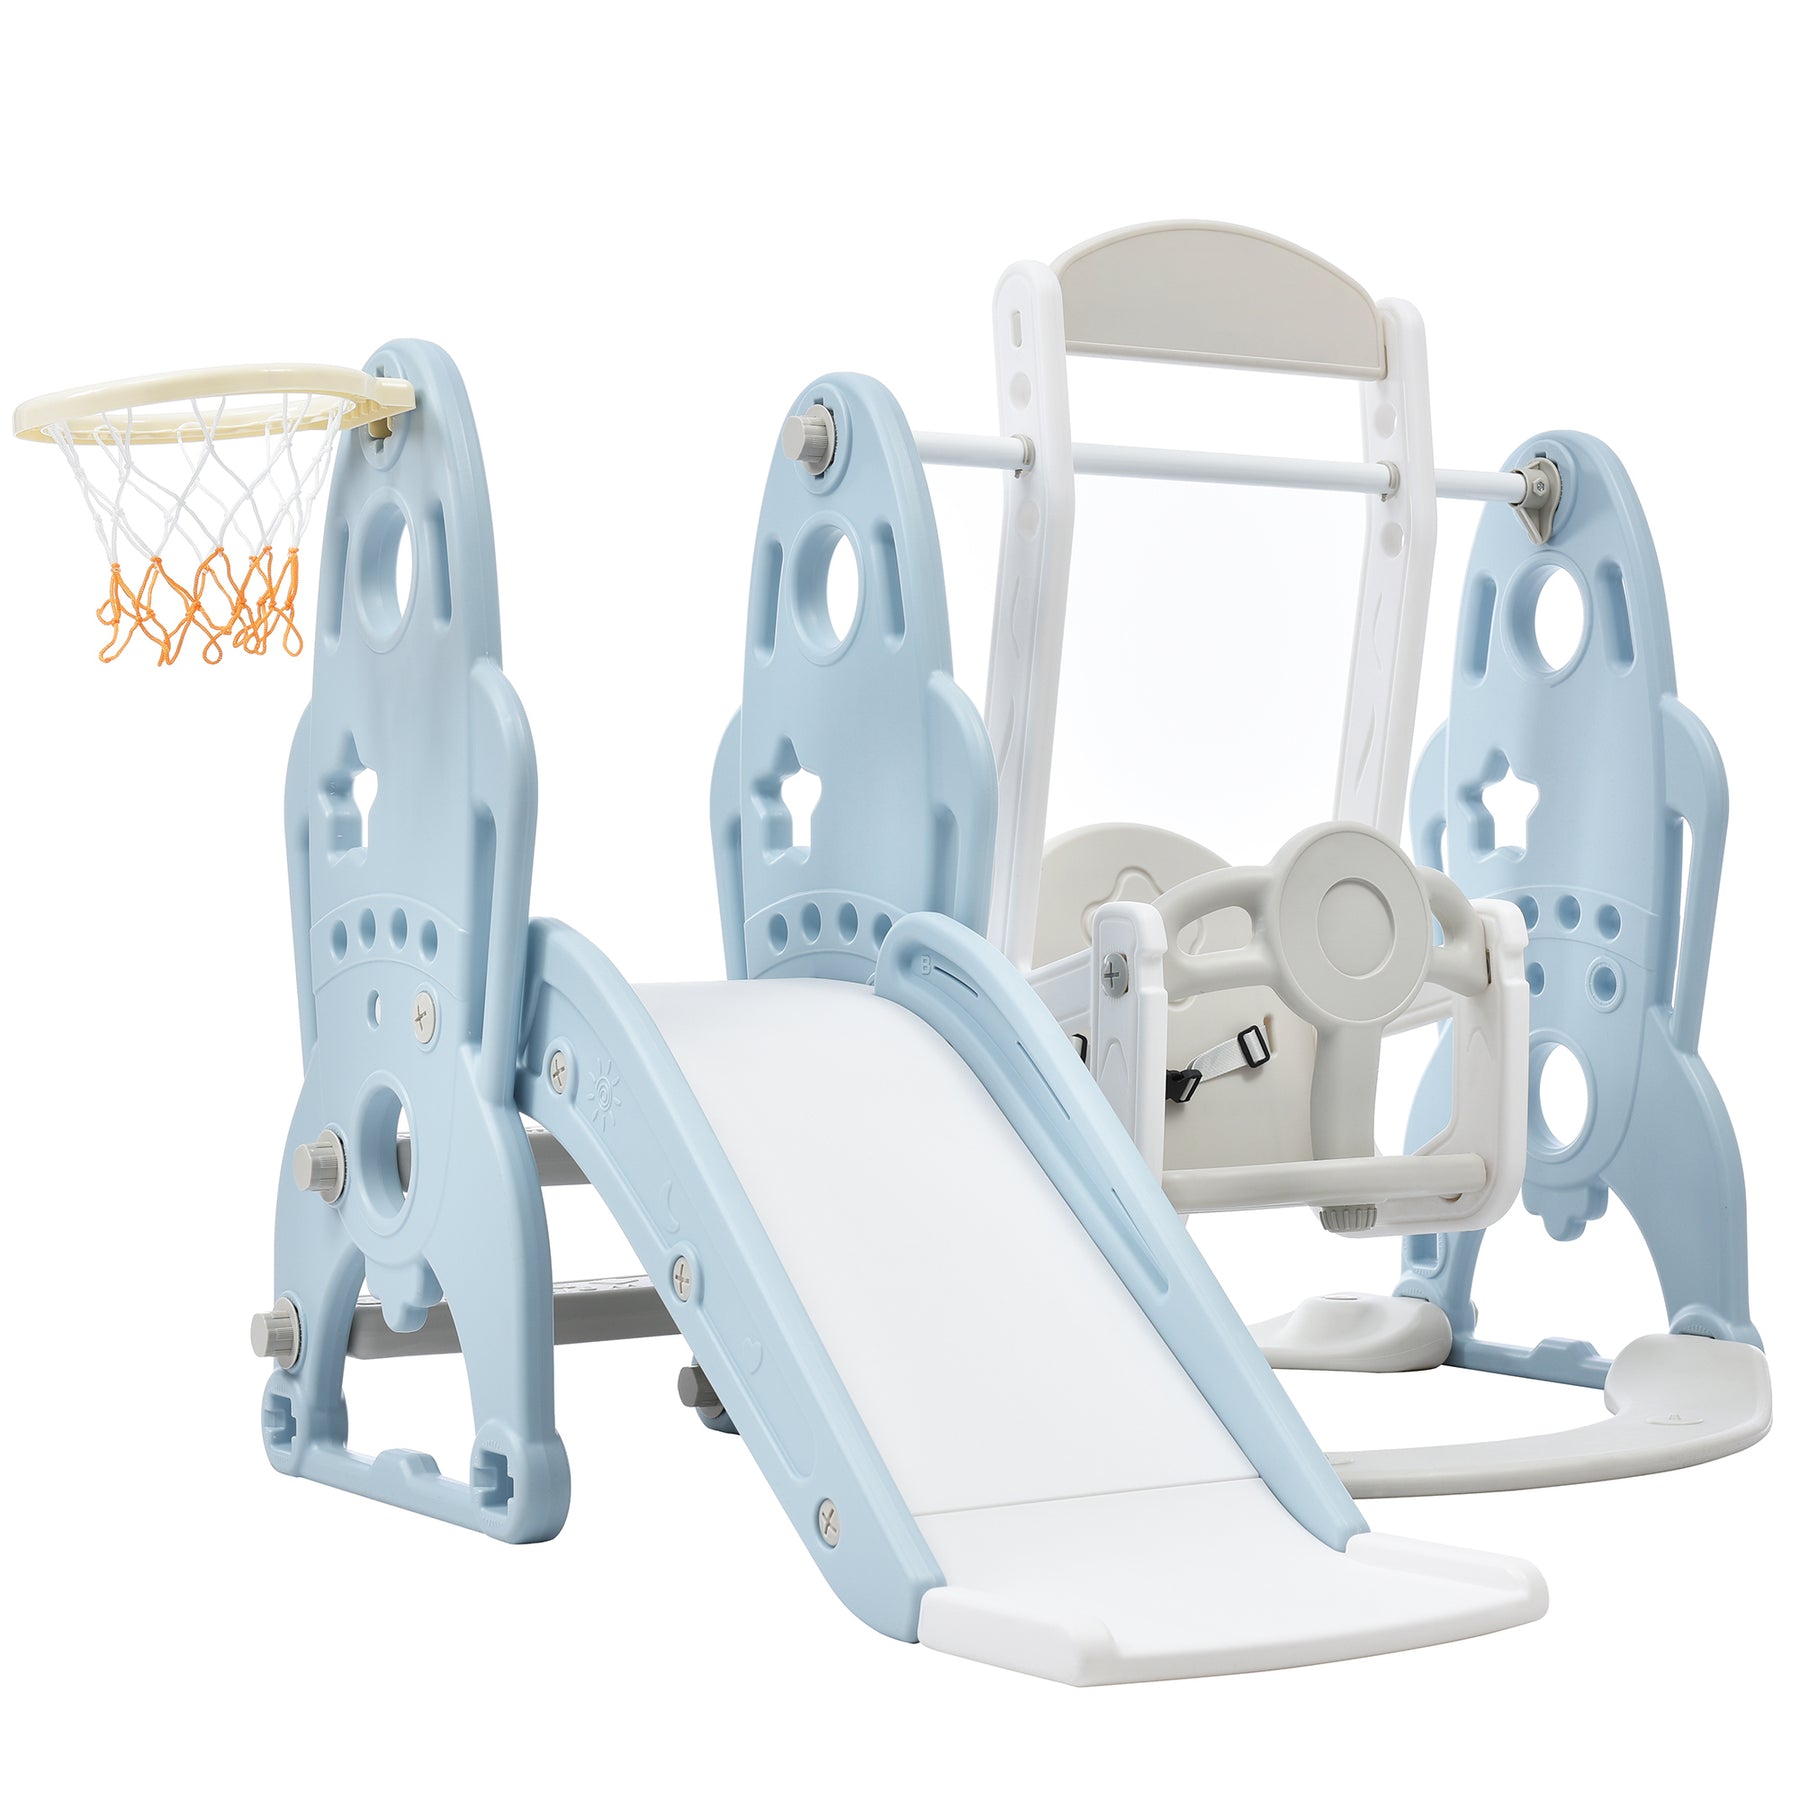 Toddler Slide and Swing Set 3 in 1, Kids Playground Climber Swing Playset with Basketball Hoops Freestanding Combination Indoor & Outdoor - Tonkn